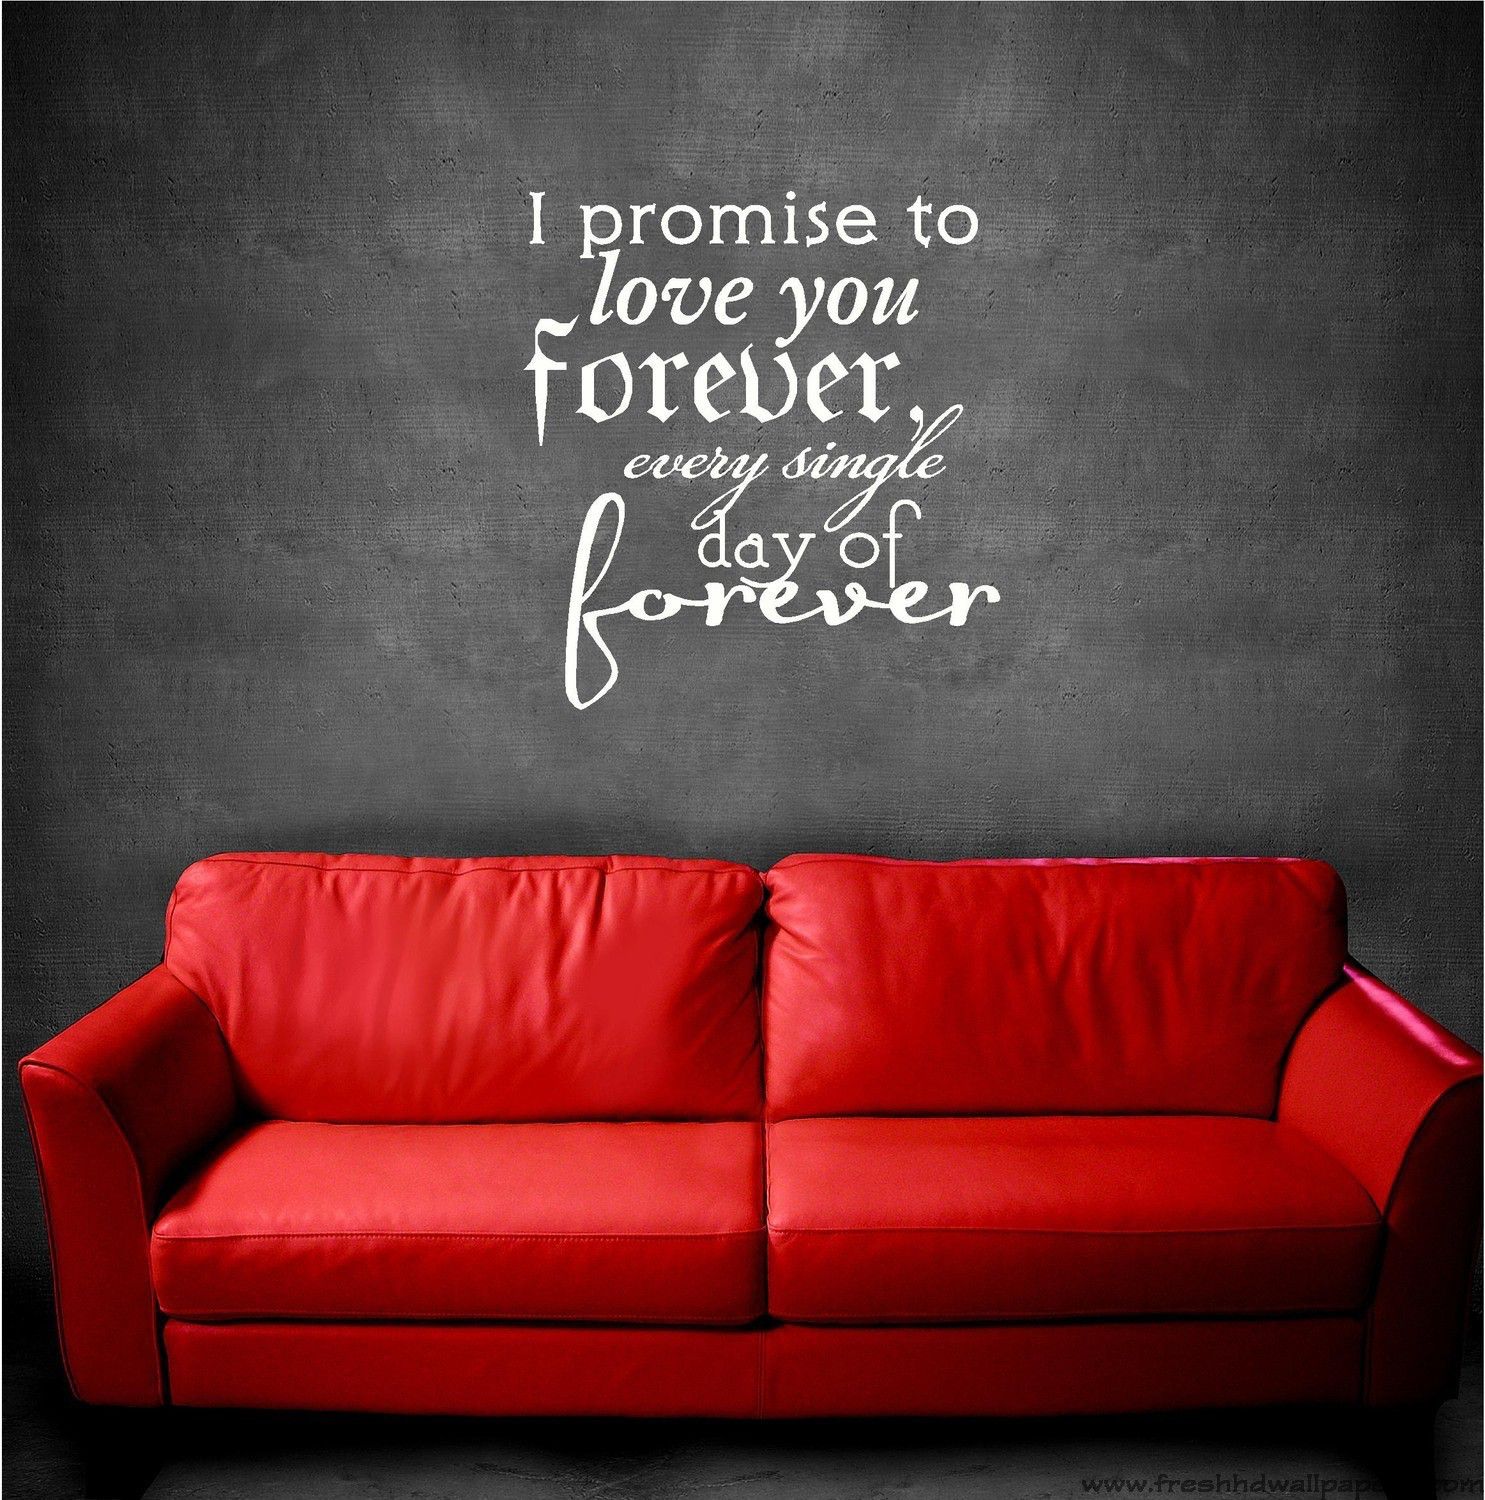 Download, Send, Promise Day Wishes, E-Greetings, Promise Day, Promise Day – 11 February, Happy Promise Day, Promise Day 2015, Sofa